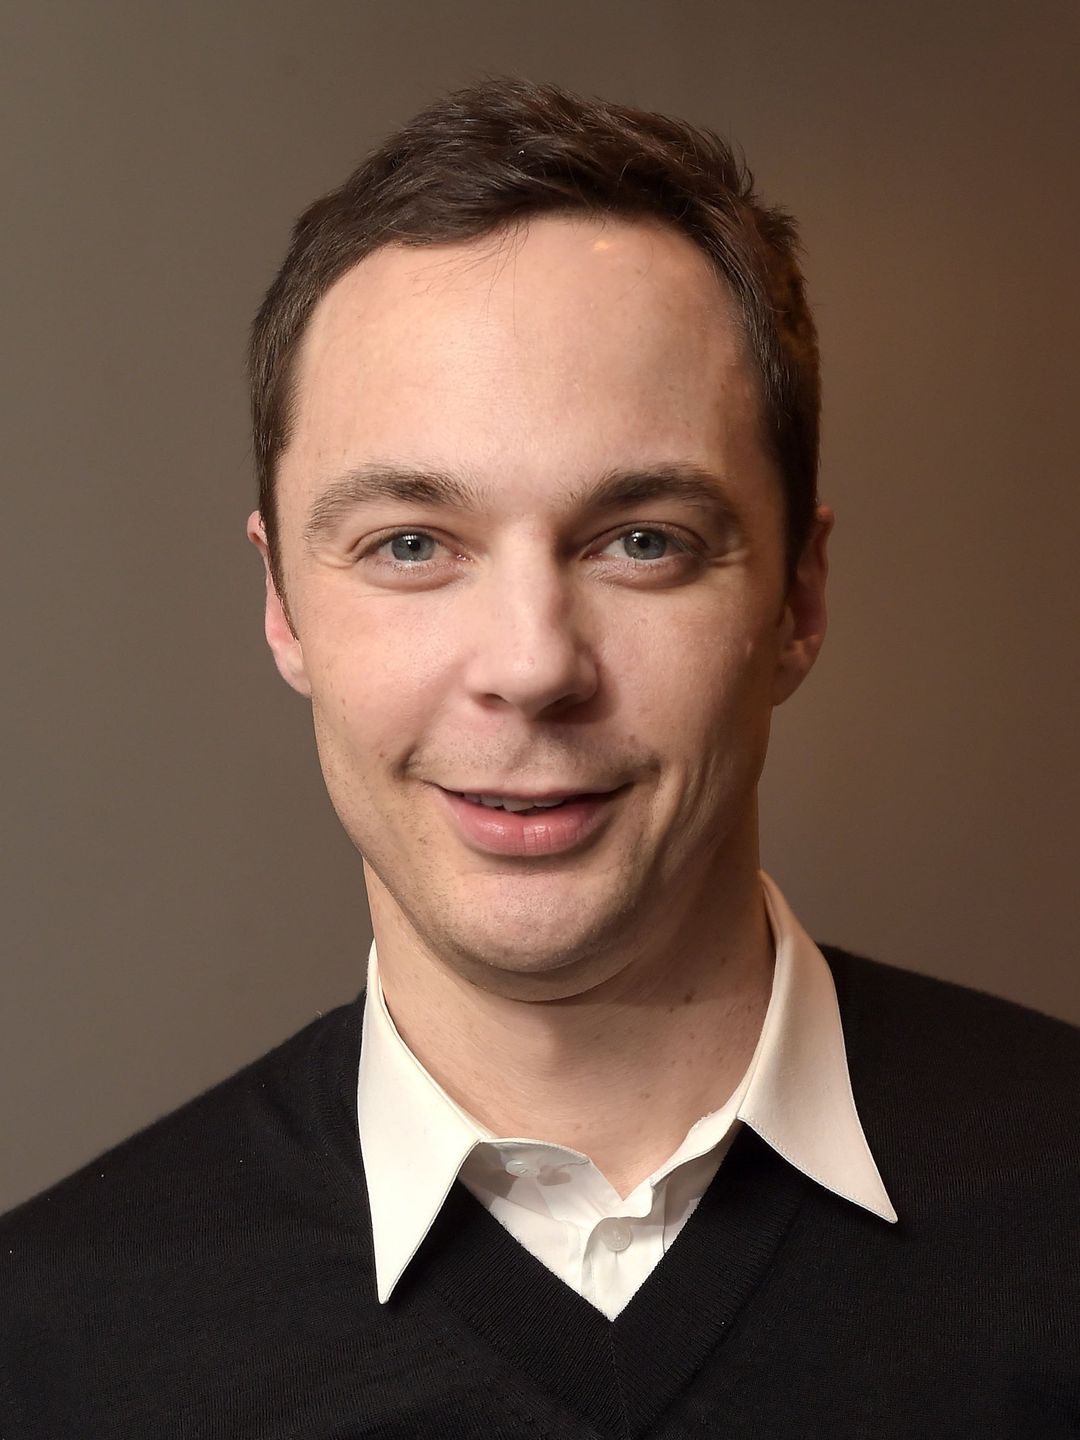 Jim Parsons place of birth